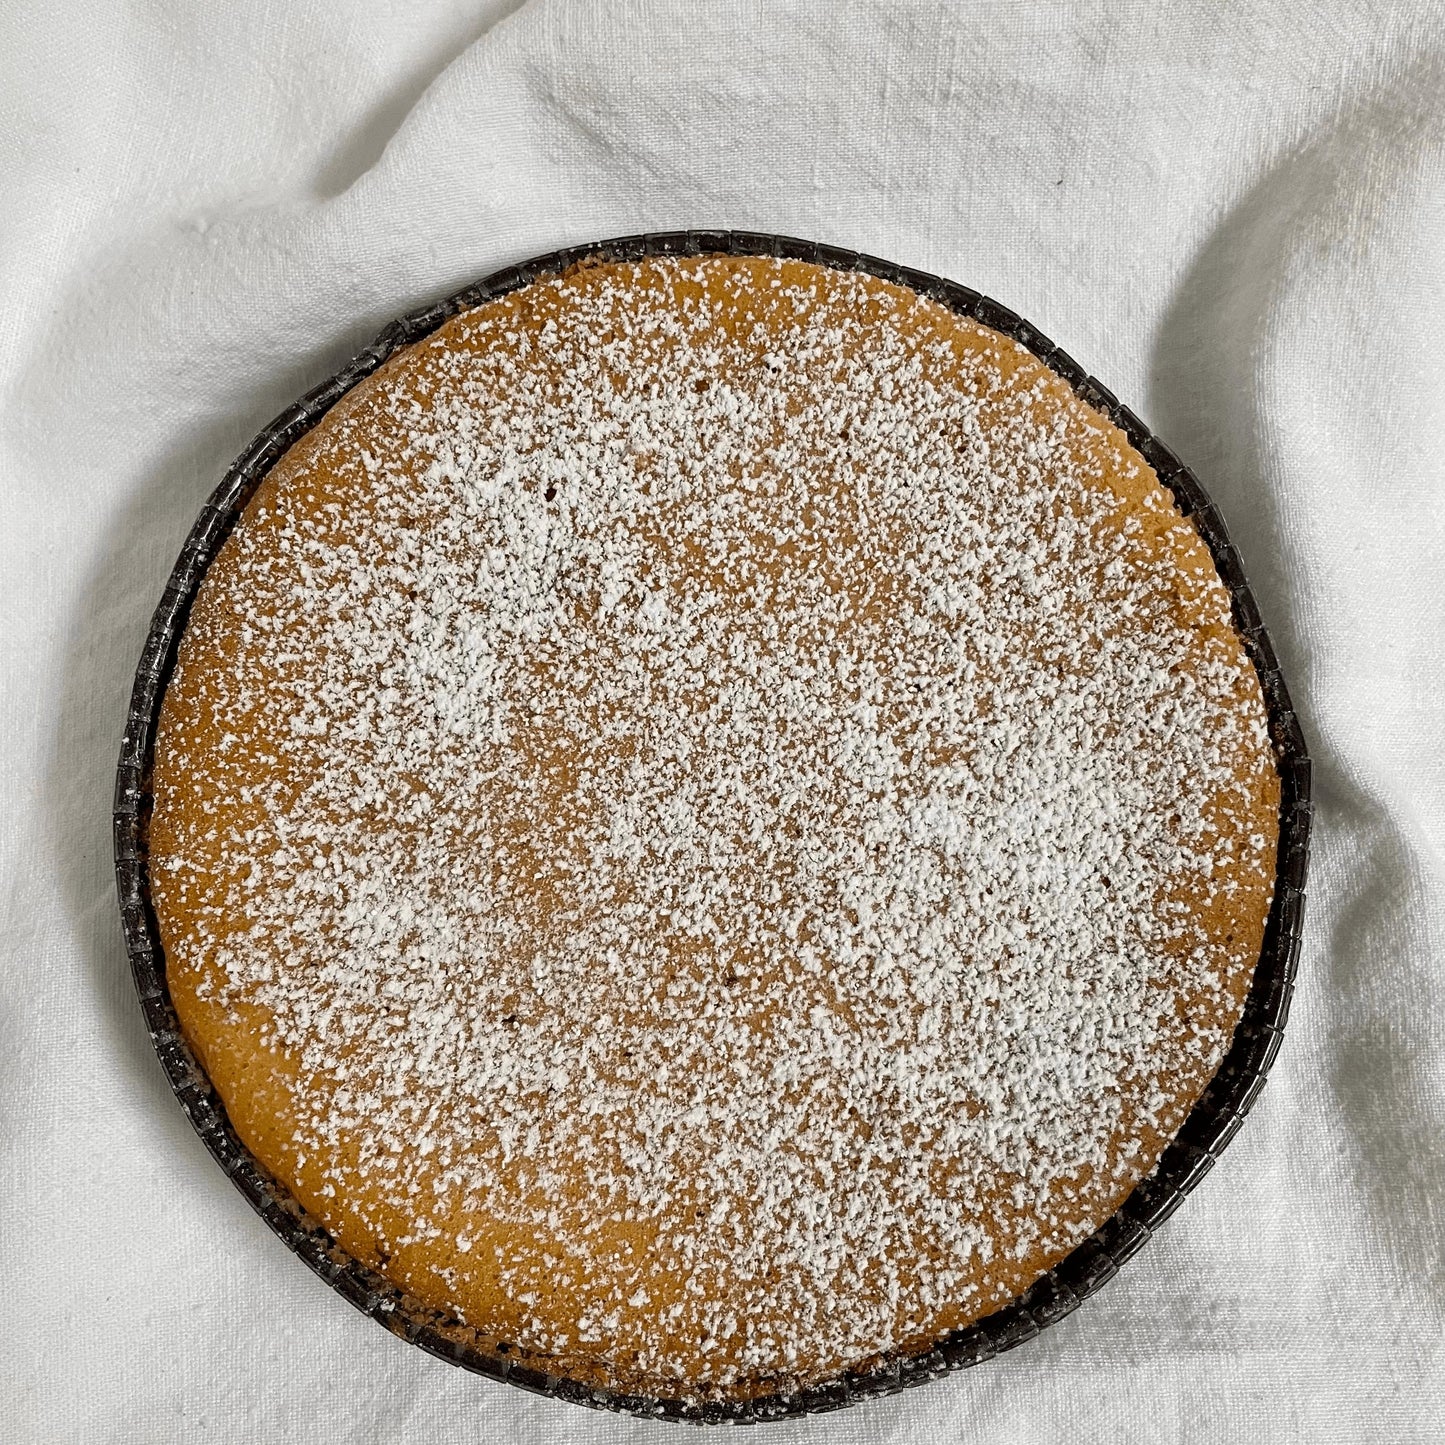 
                  
                    Gluten-free, dairy-free, sugar-free Lemon Lush Cake topped with sugar-free caramel syrup and toasted almonds, highlighting its fluffy texture and zesty lemon flavor. Full Life Gourmet Bakery
                  
                